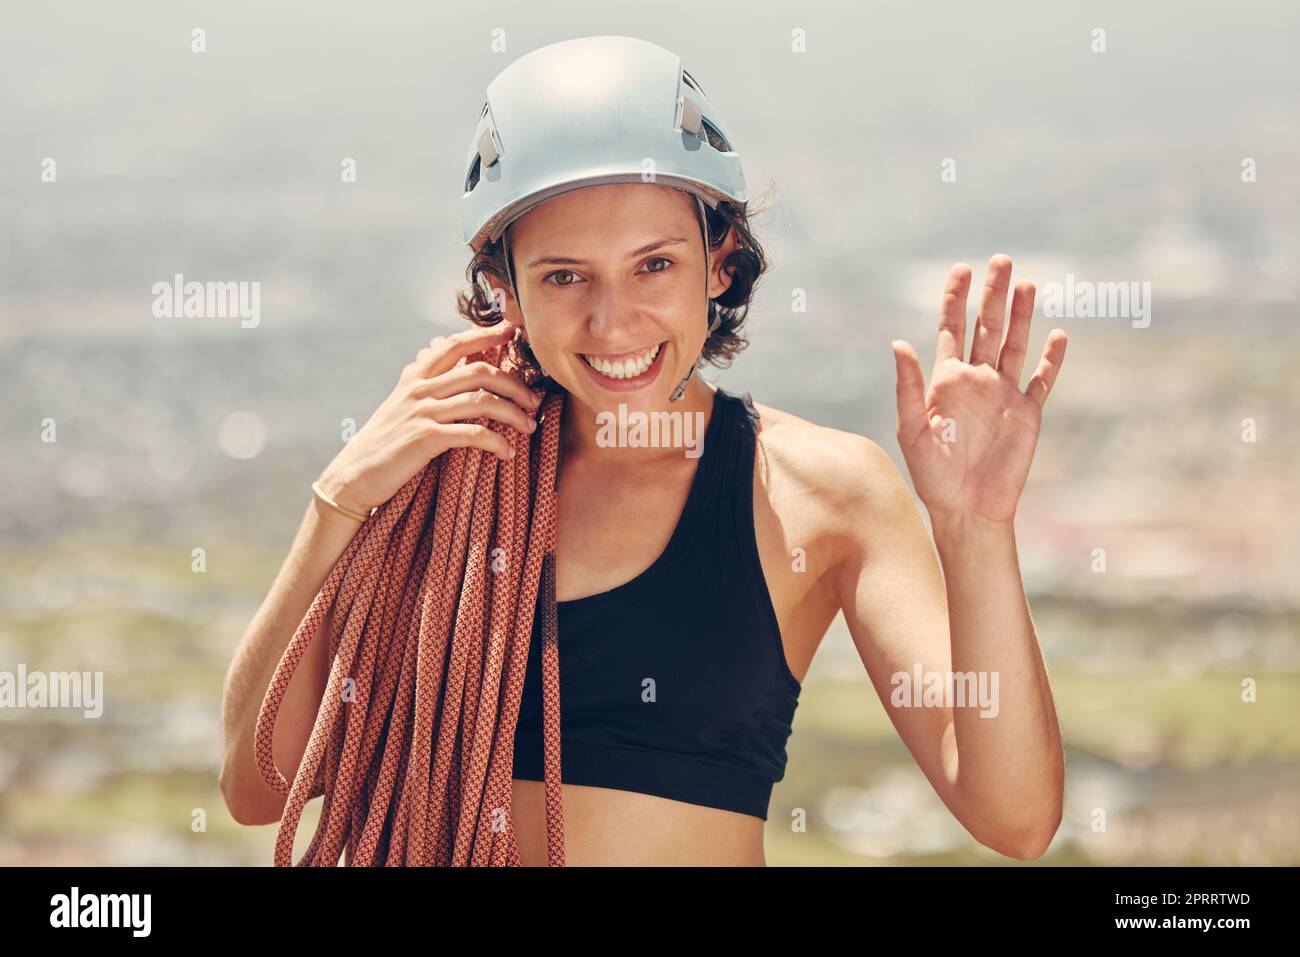 Rock climbing, rope and woman portrait happy to challenge her fitness and hiking outdoors in nature adventure. Helmet, smile and mountain climber girl waving and ready for exercise and sports workout Stock Photo